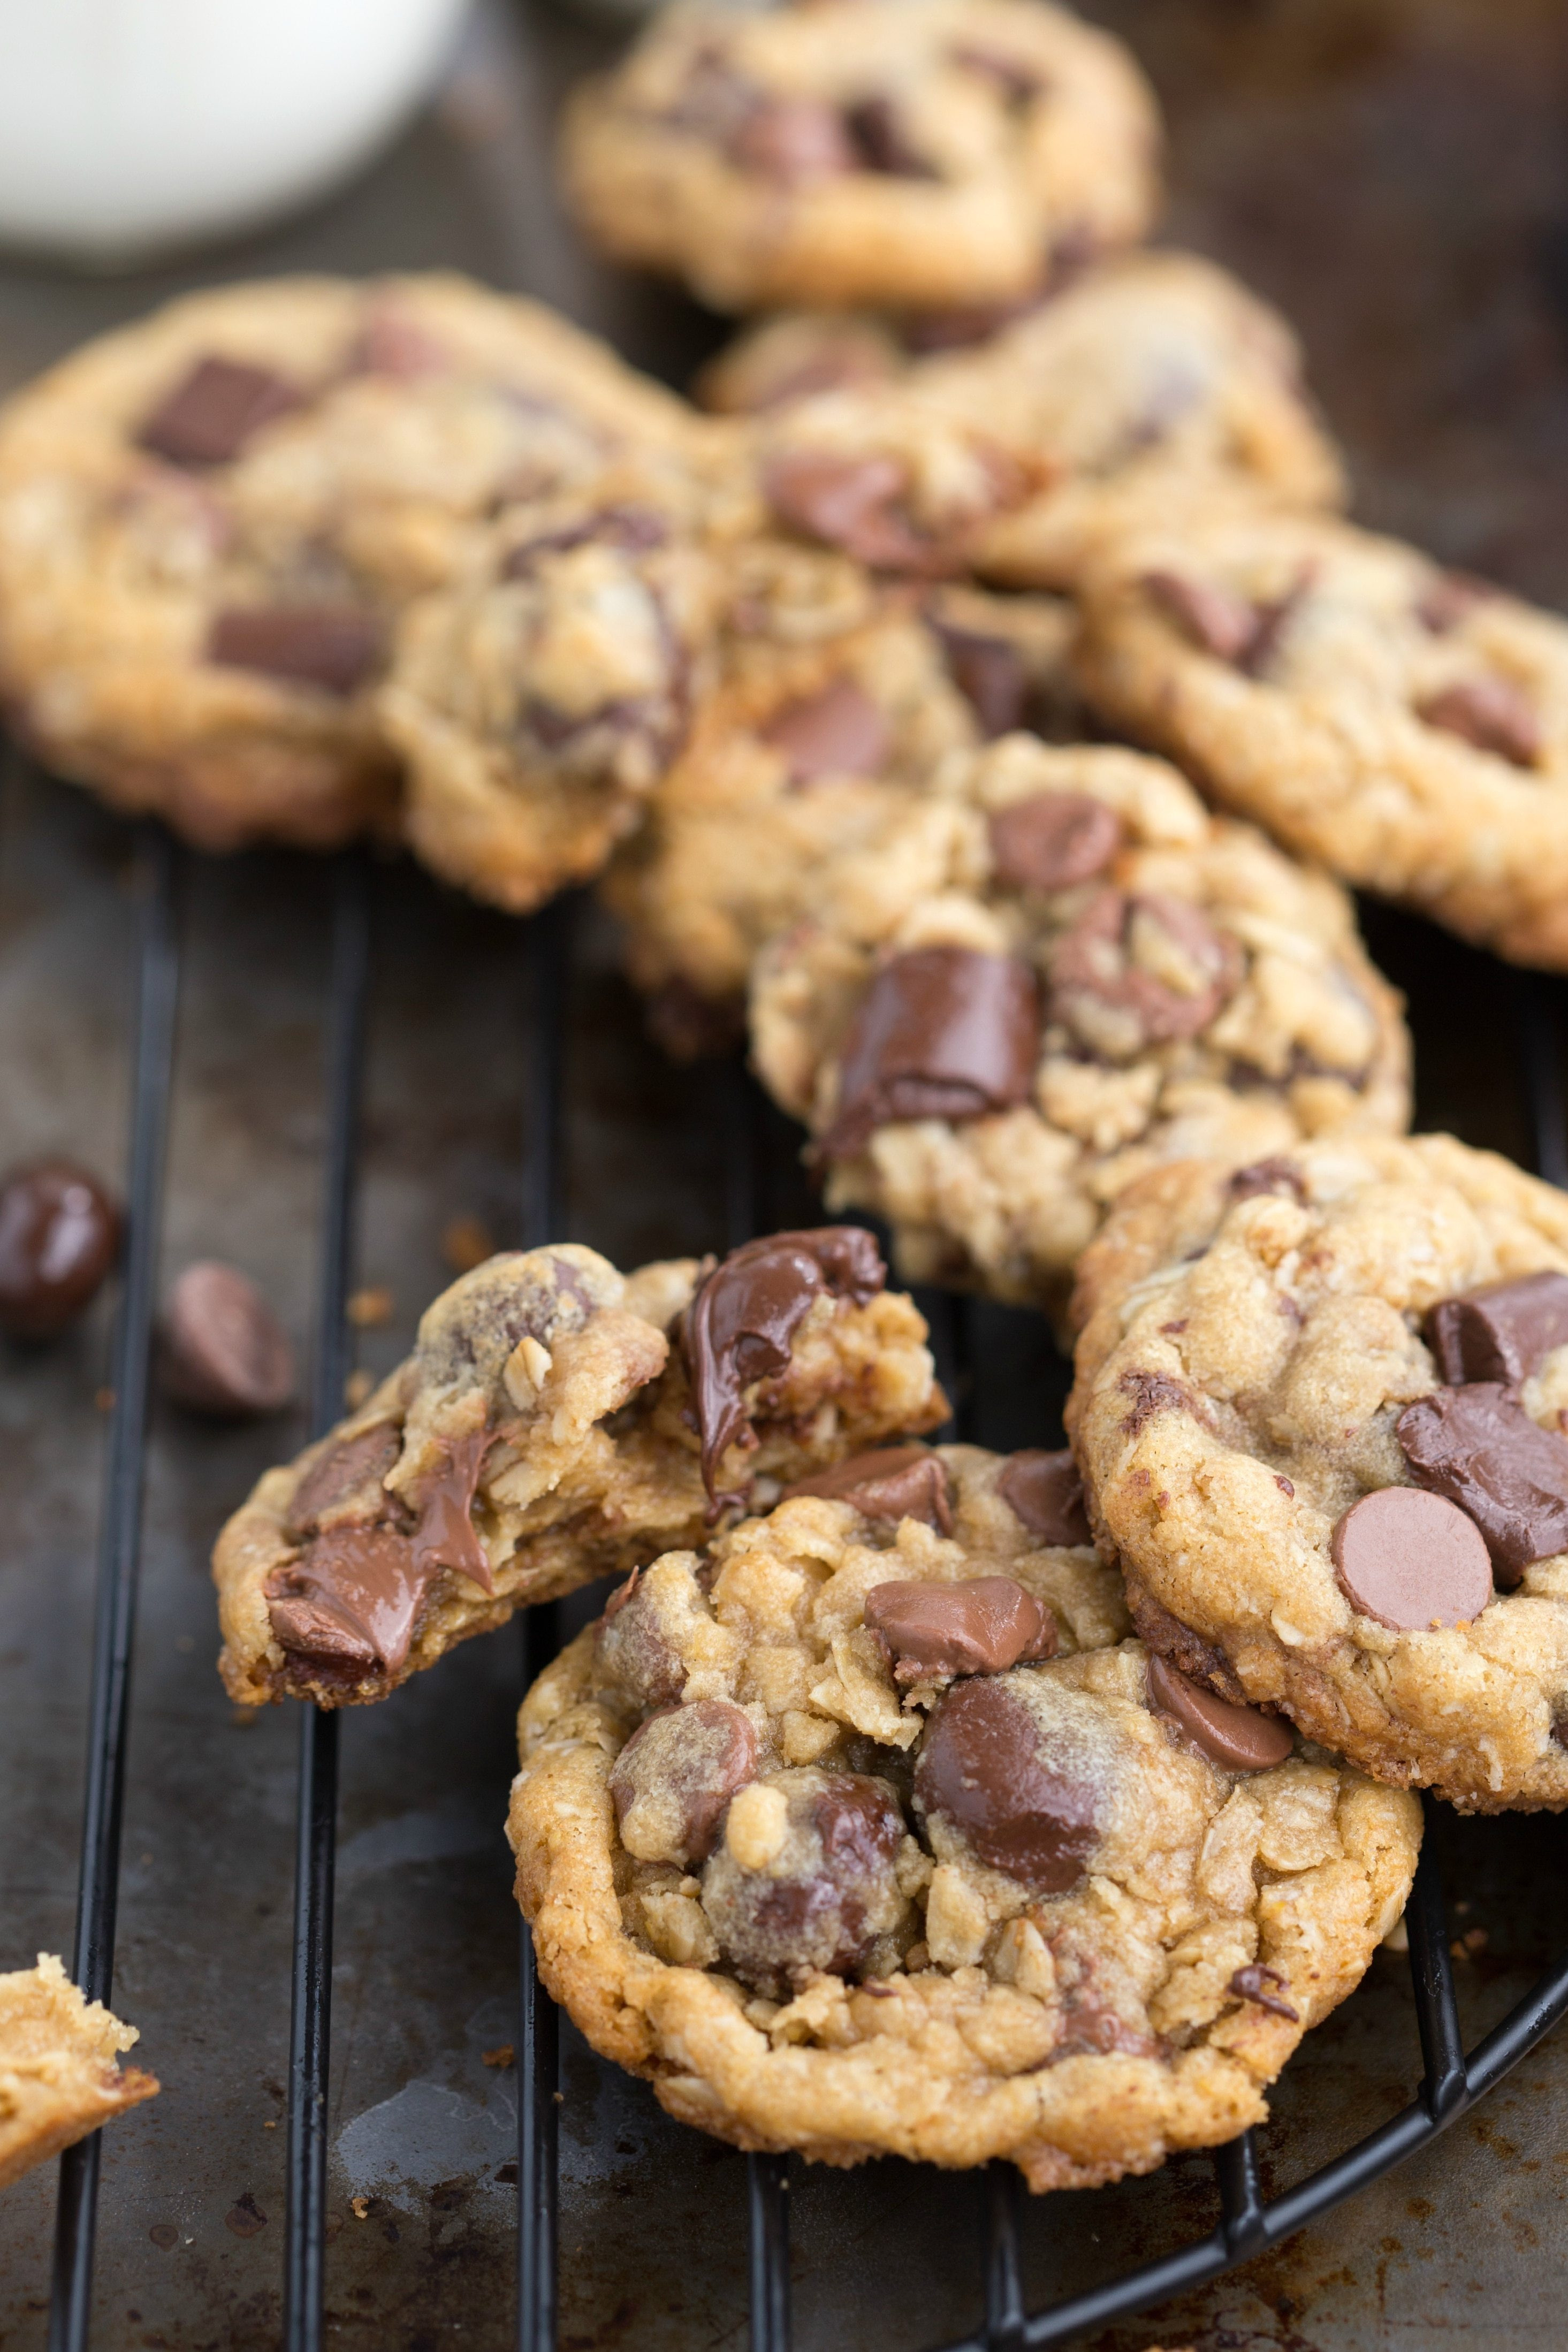 Oatmeal Chocolate Chip Cookies Healthy
 Healthier Oatmeal Chocolate Chip Cookies with Dark